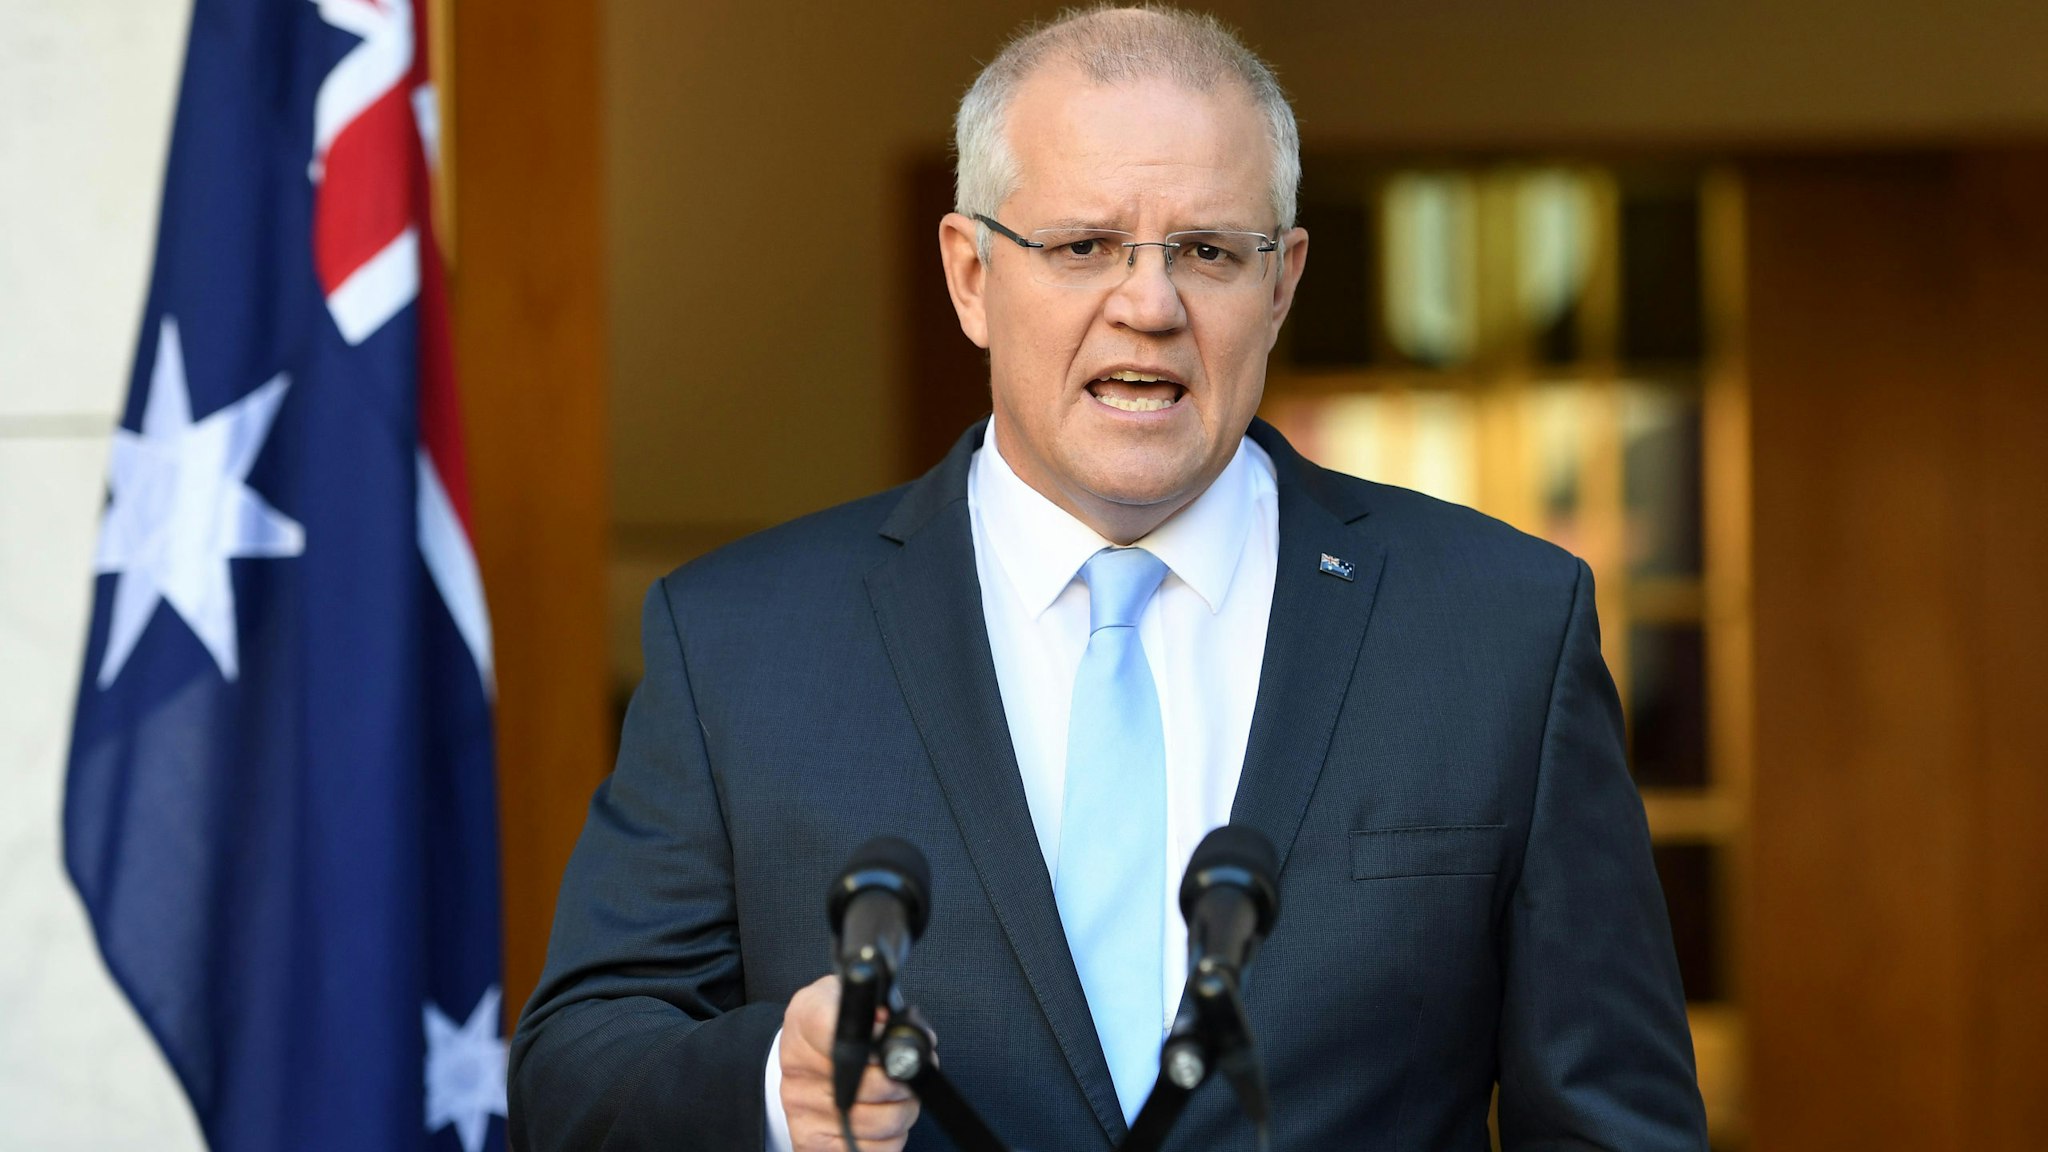 CANBERRA, AUSTRALIA - APRIL 11: Australian Prime Minister Scott Morrison talks to the media at a press conference announcing an election date at Parliament House on April 11, 2019 in Canberra, Australia. Scott Morrison visited the Governor General today to ask for an election on 18 May. All 151 House of Representatives seats will be up for election.